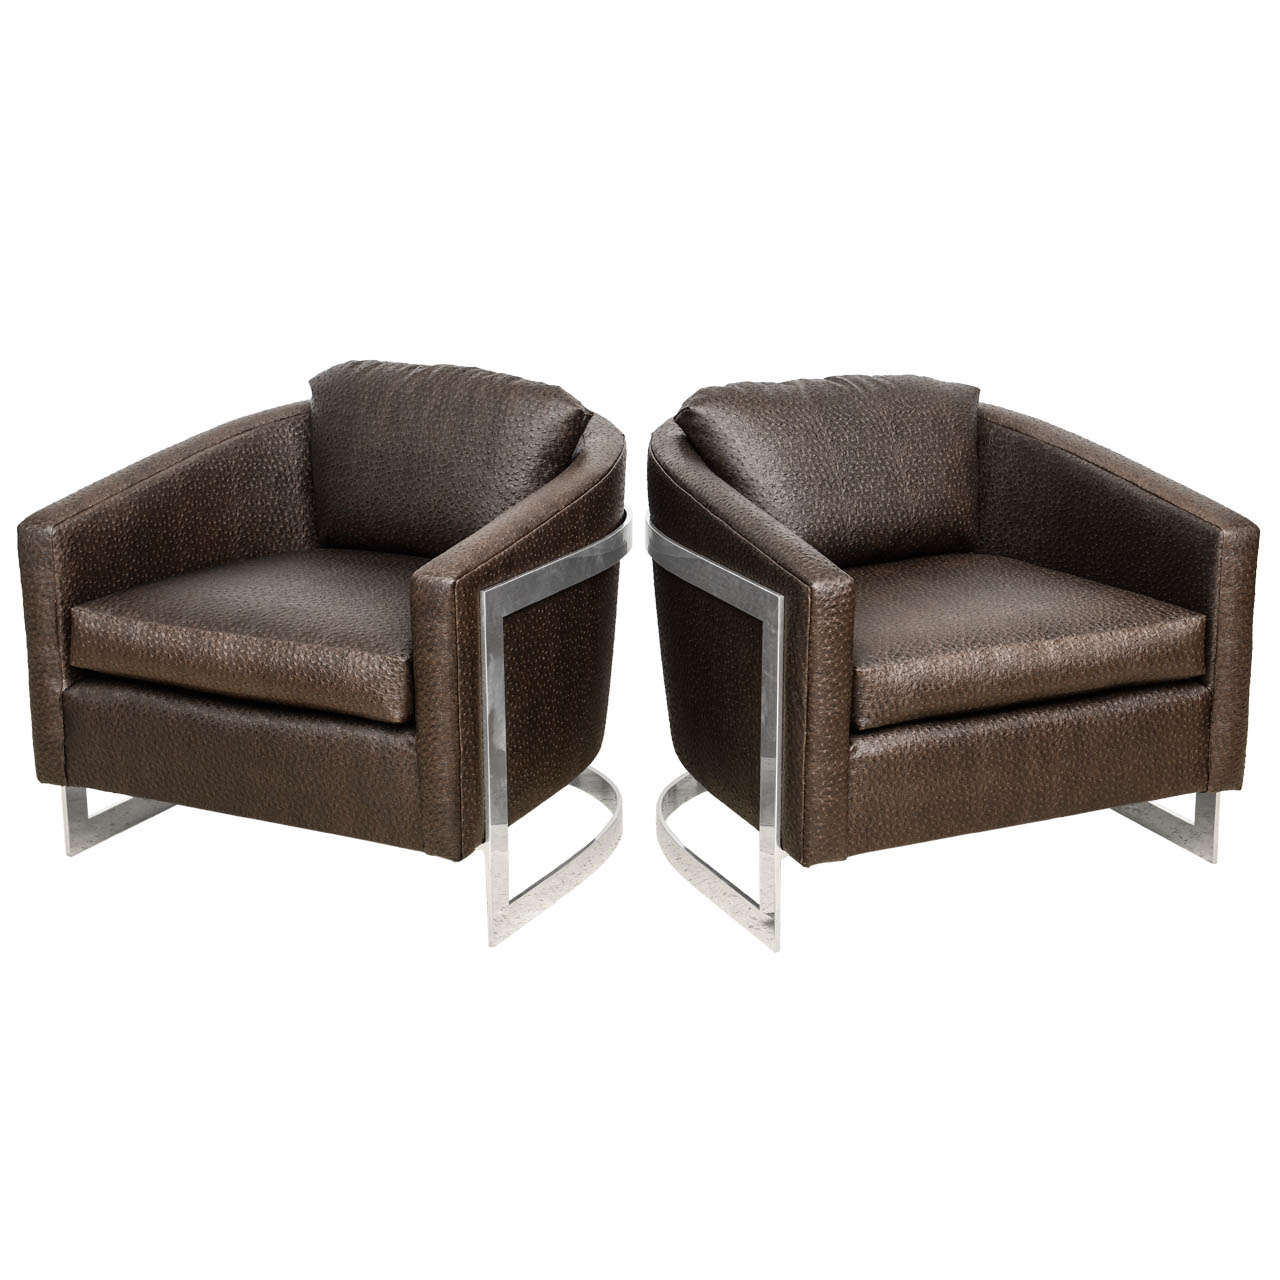 Pair of Mid Century Modern Polished Chrome and "Ostrich" Upholstered Chairs For Sale